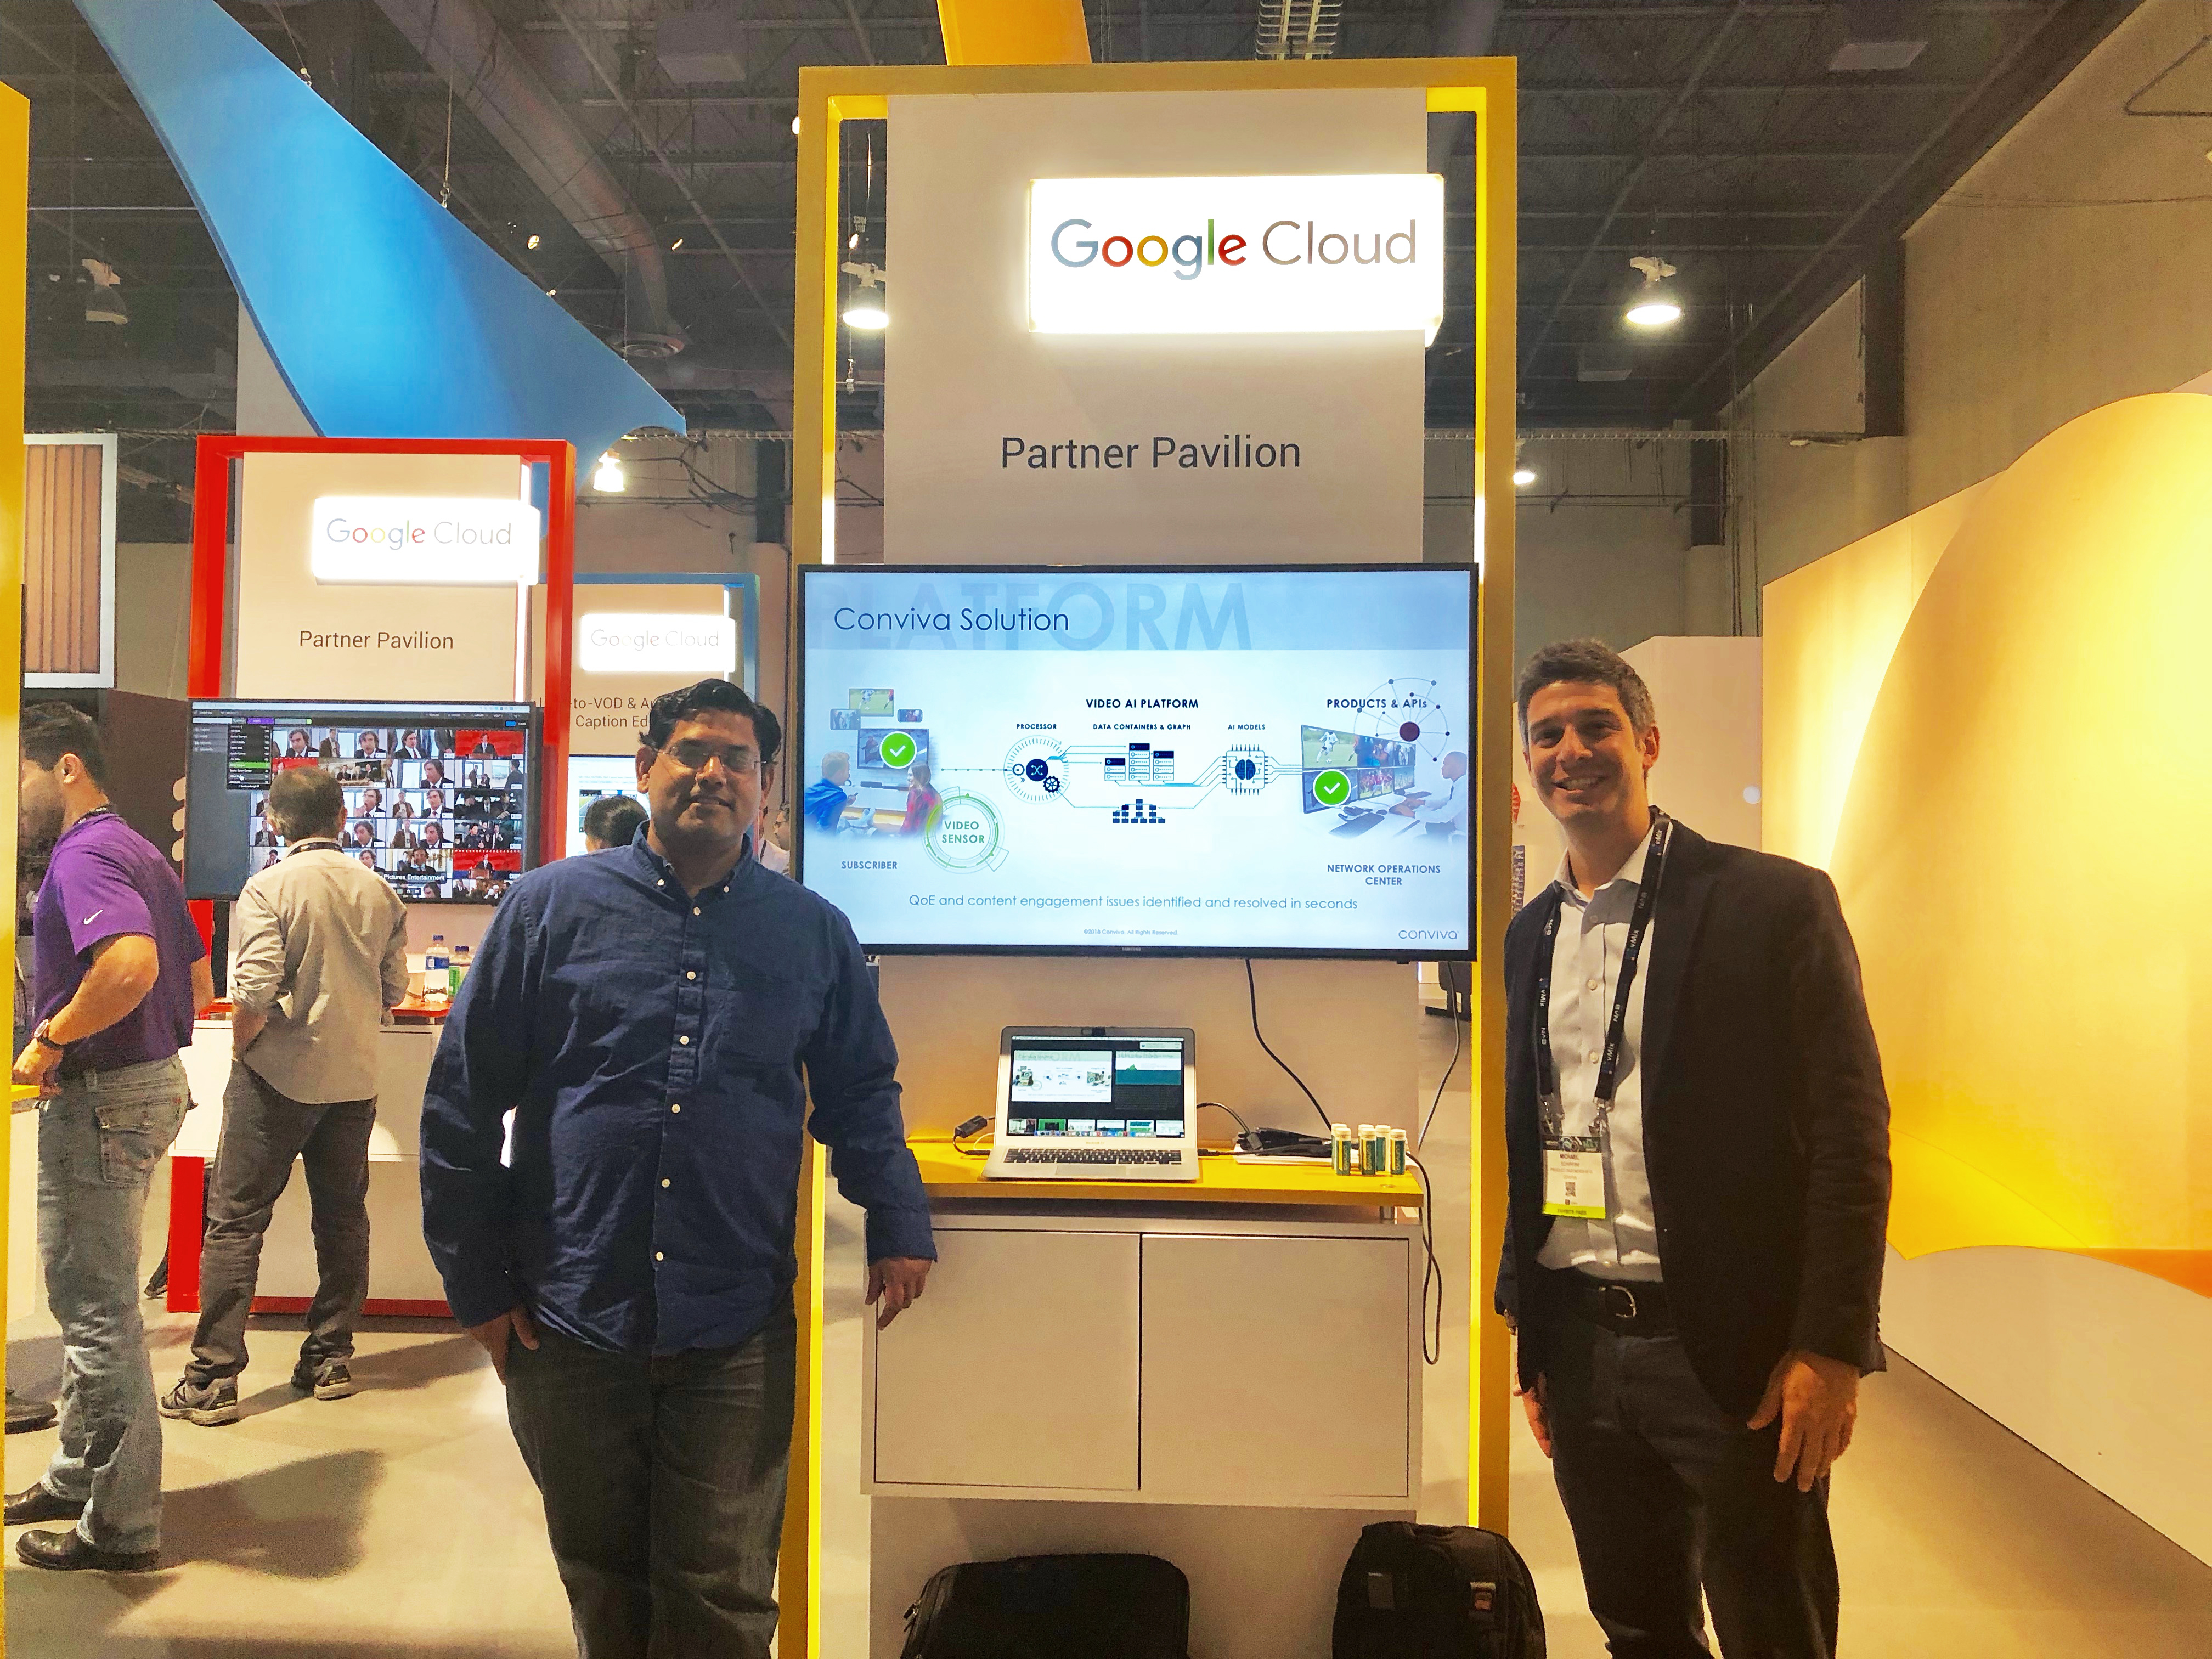 Conviva's Taking Picture At Google Cloud Partner Pavilion Of Conviva's Solution To Video Ai Platform